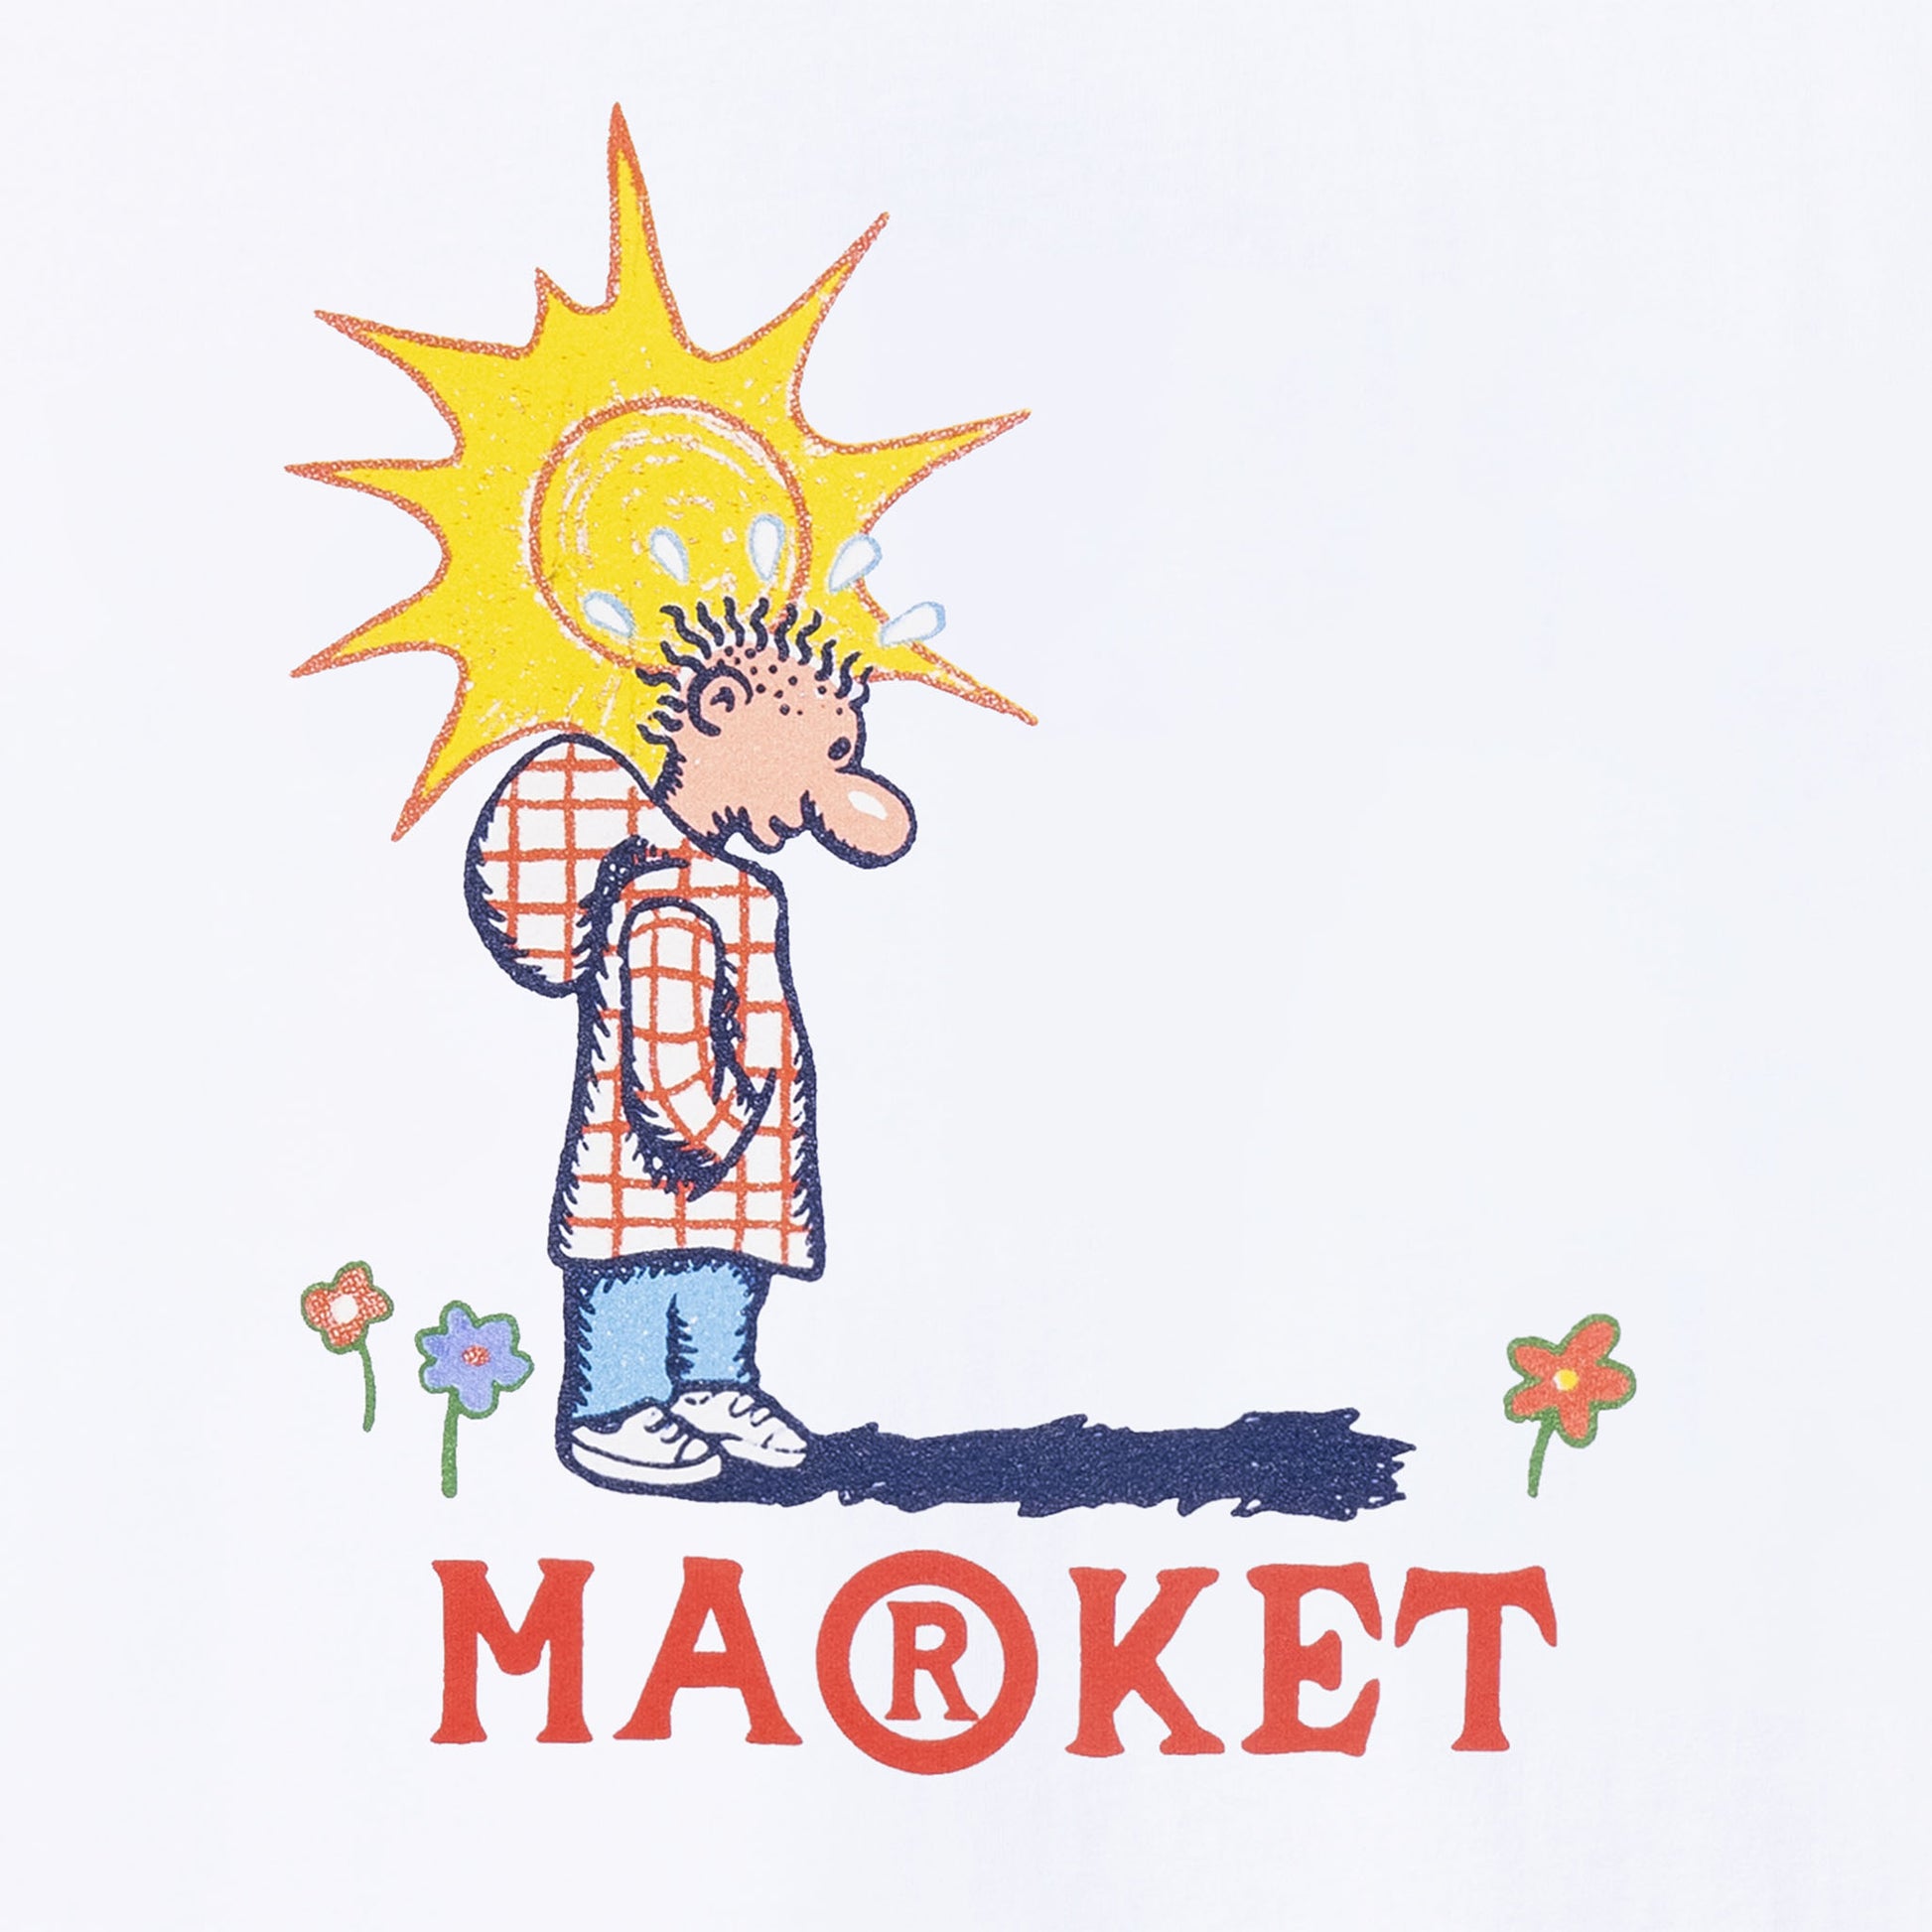 MARKET clothing brand SHADOW WORK T-SHIRT. Find more graphic tees, hats, hoodies and more at MarketStudios.com. Formally Chinatown Market.